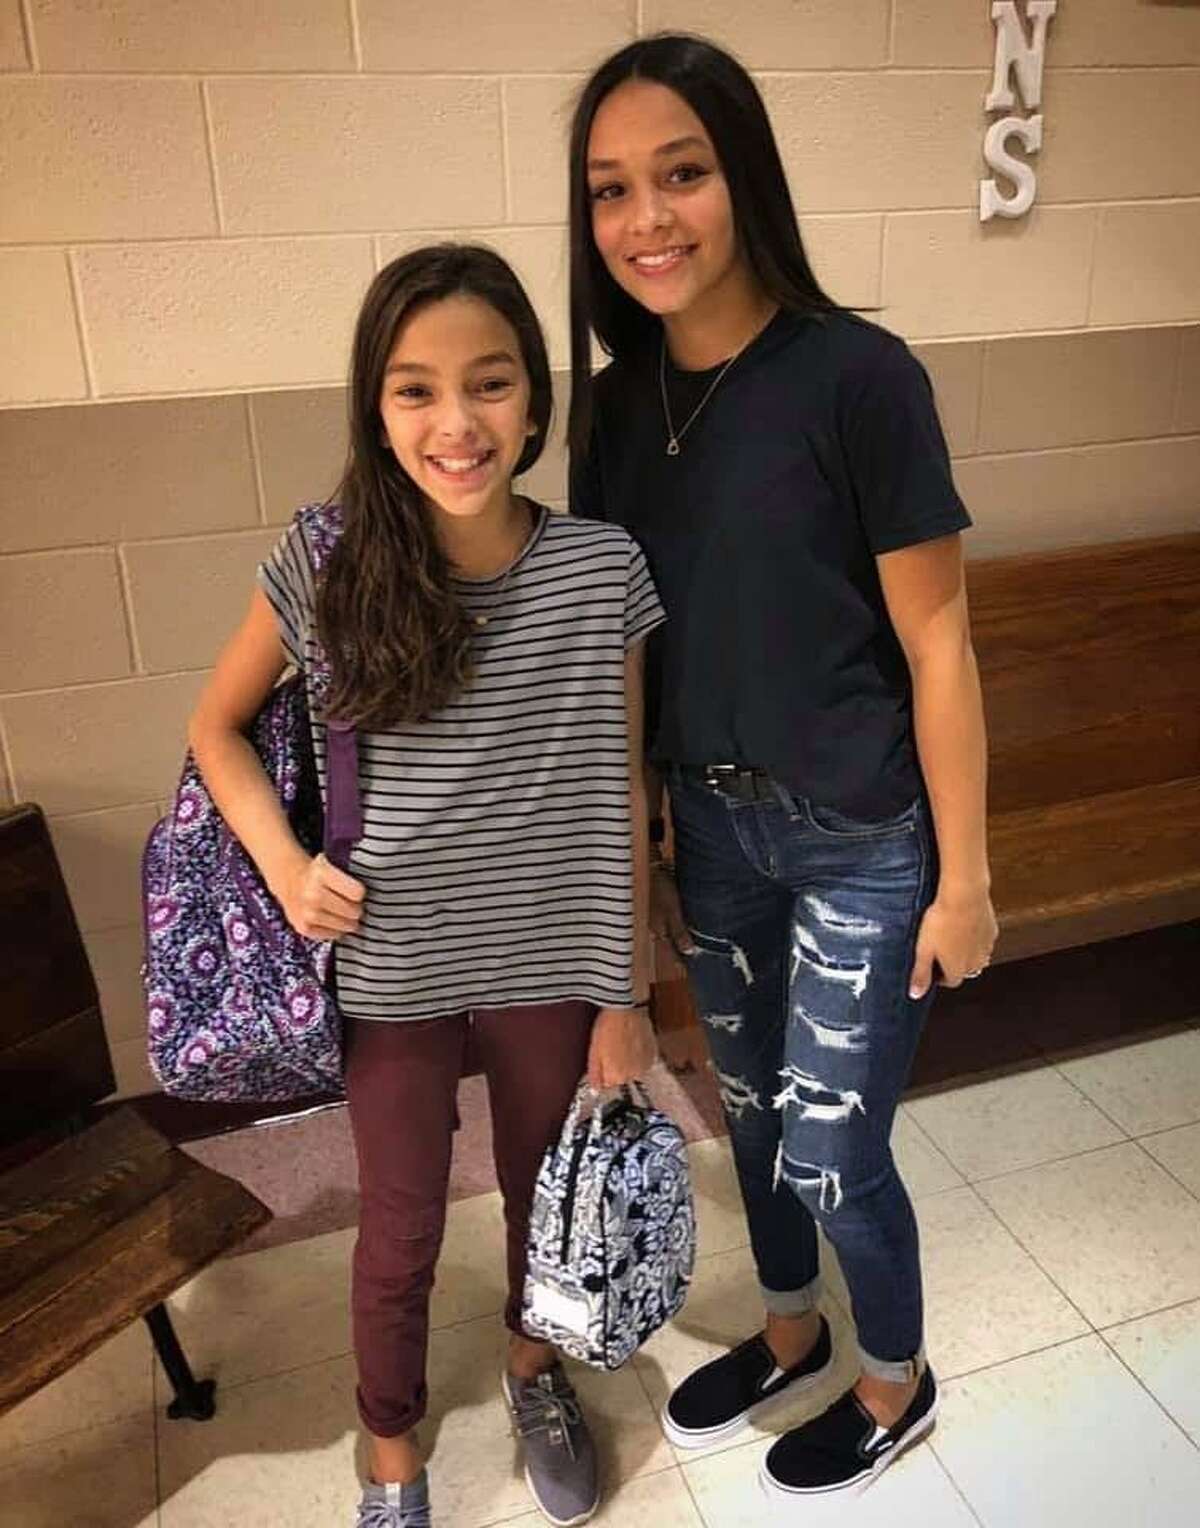 London Sophia Bribiescas, 10, is shown with her sister, Alexa Denice Montez, 16. London was a fifth-grader at Leon Springs Elementary School. Alexa was a sophomore and a cheerleader at Clark High School.